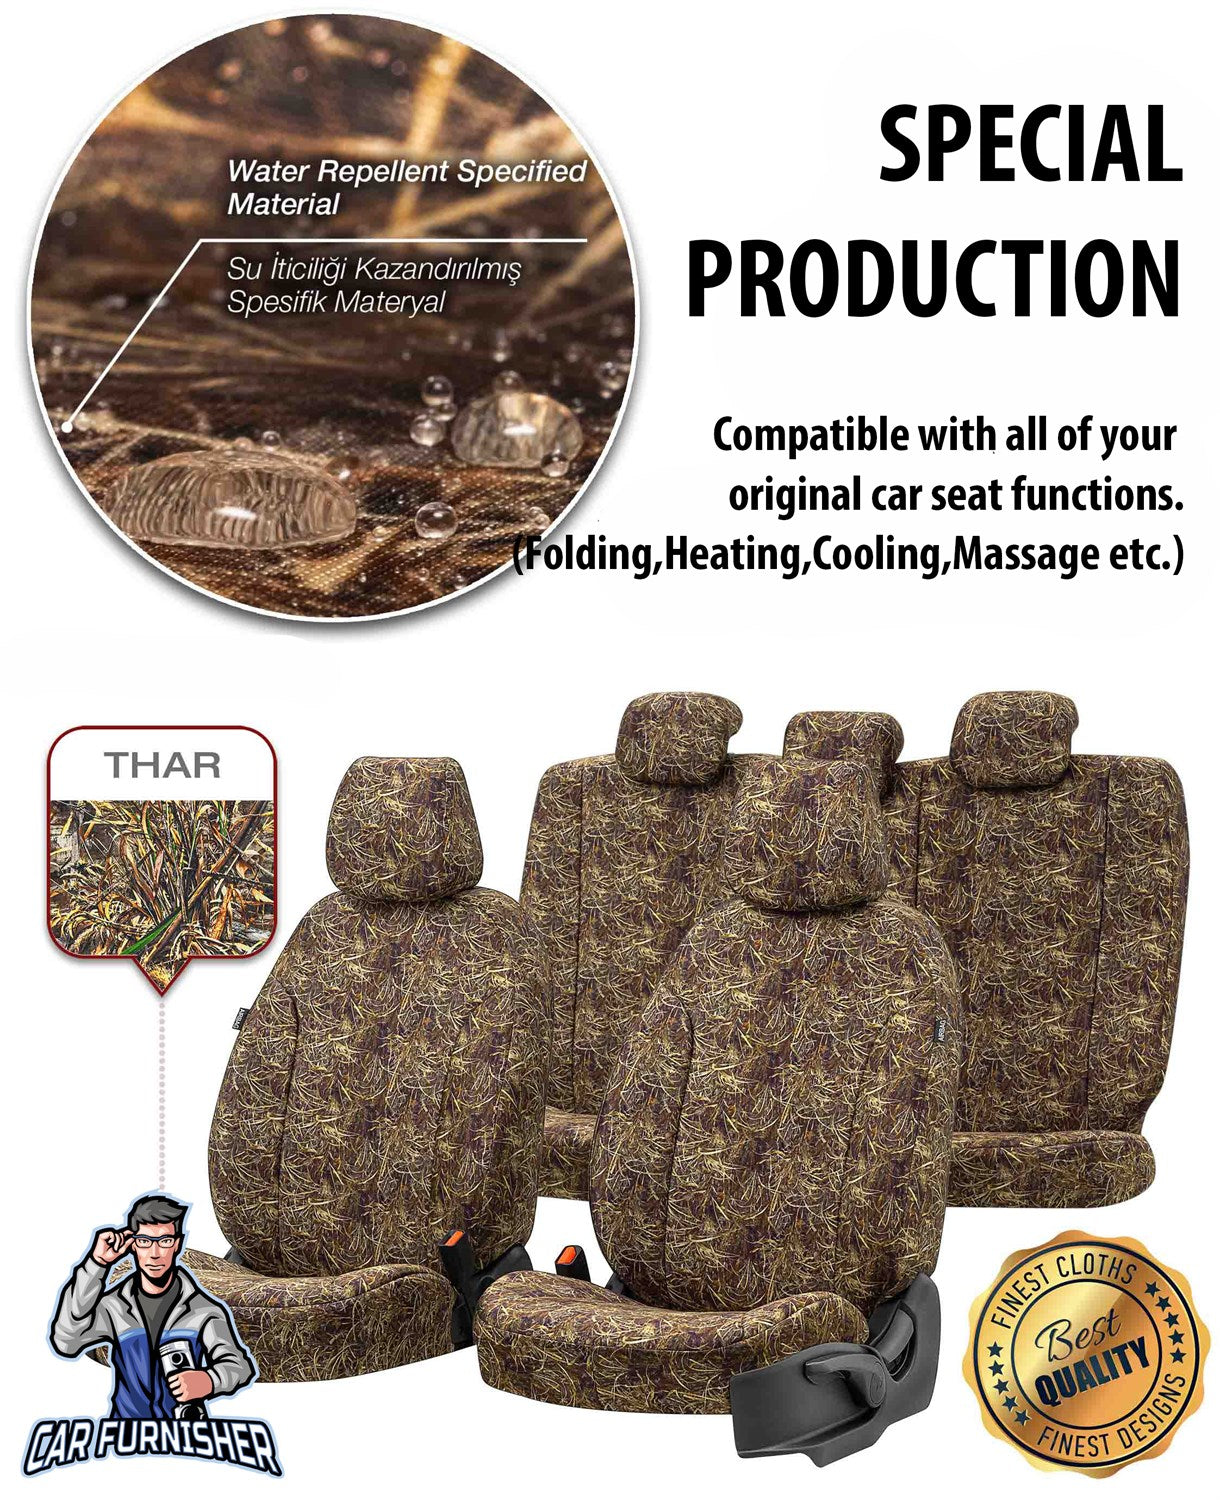 Audi Q7 Seat Cover Camouflage Waterproof Design Montblanc Camo Waterproof Fabric